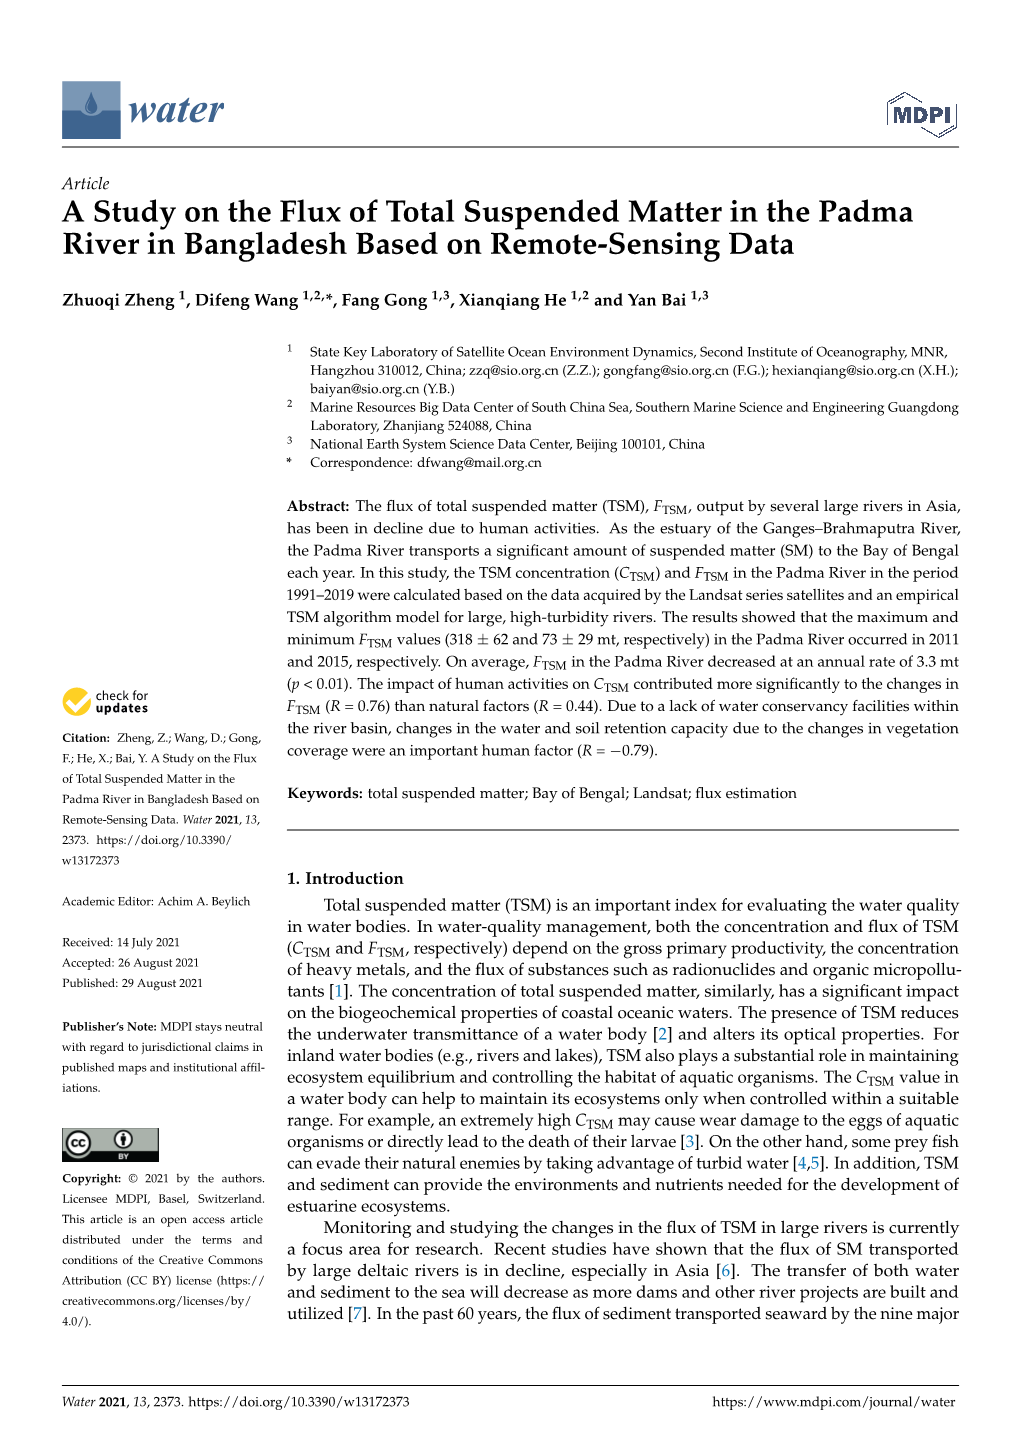 A Study on the Flux of Total Suspended Matter in the Padma River in Bangladesh Based on Remote-Sensing Data